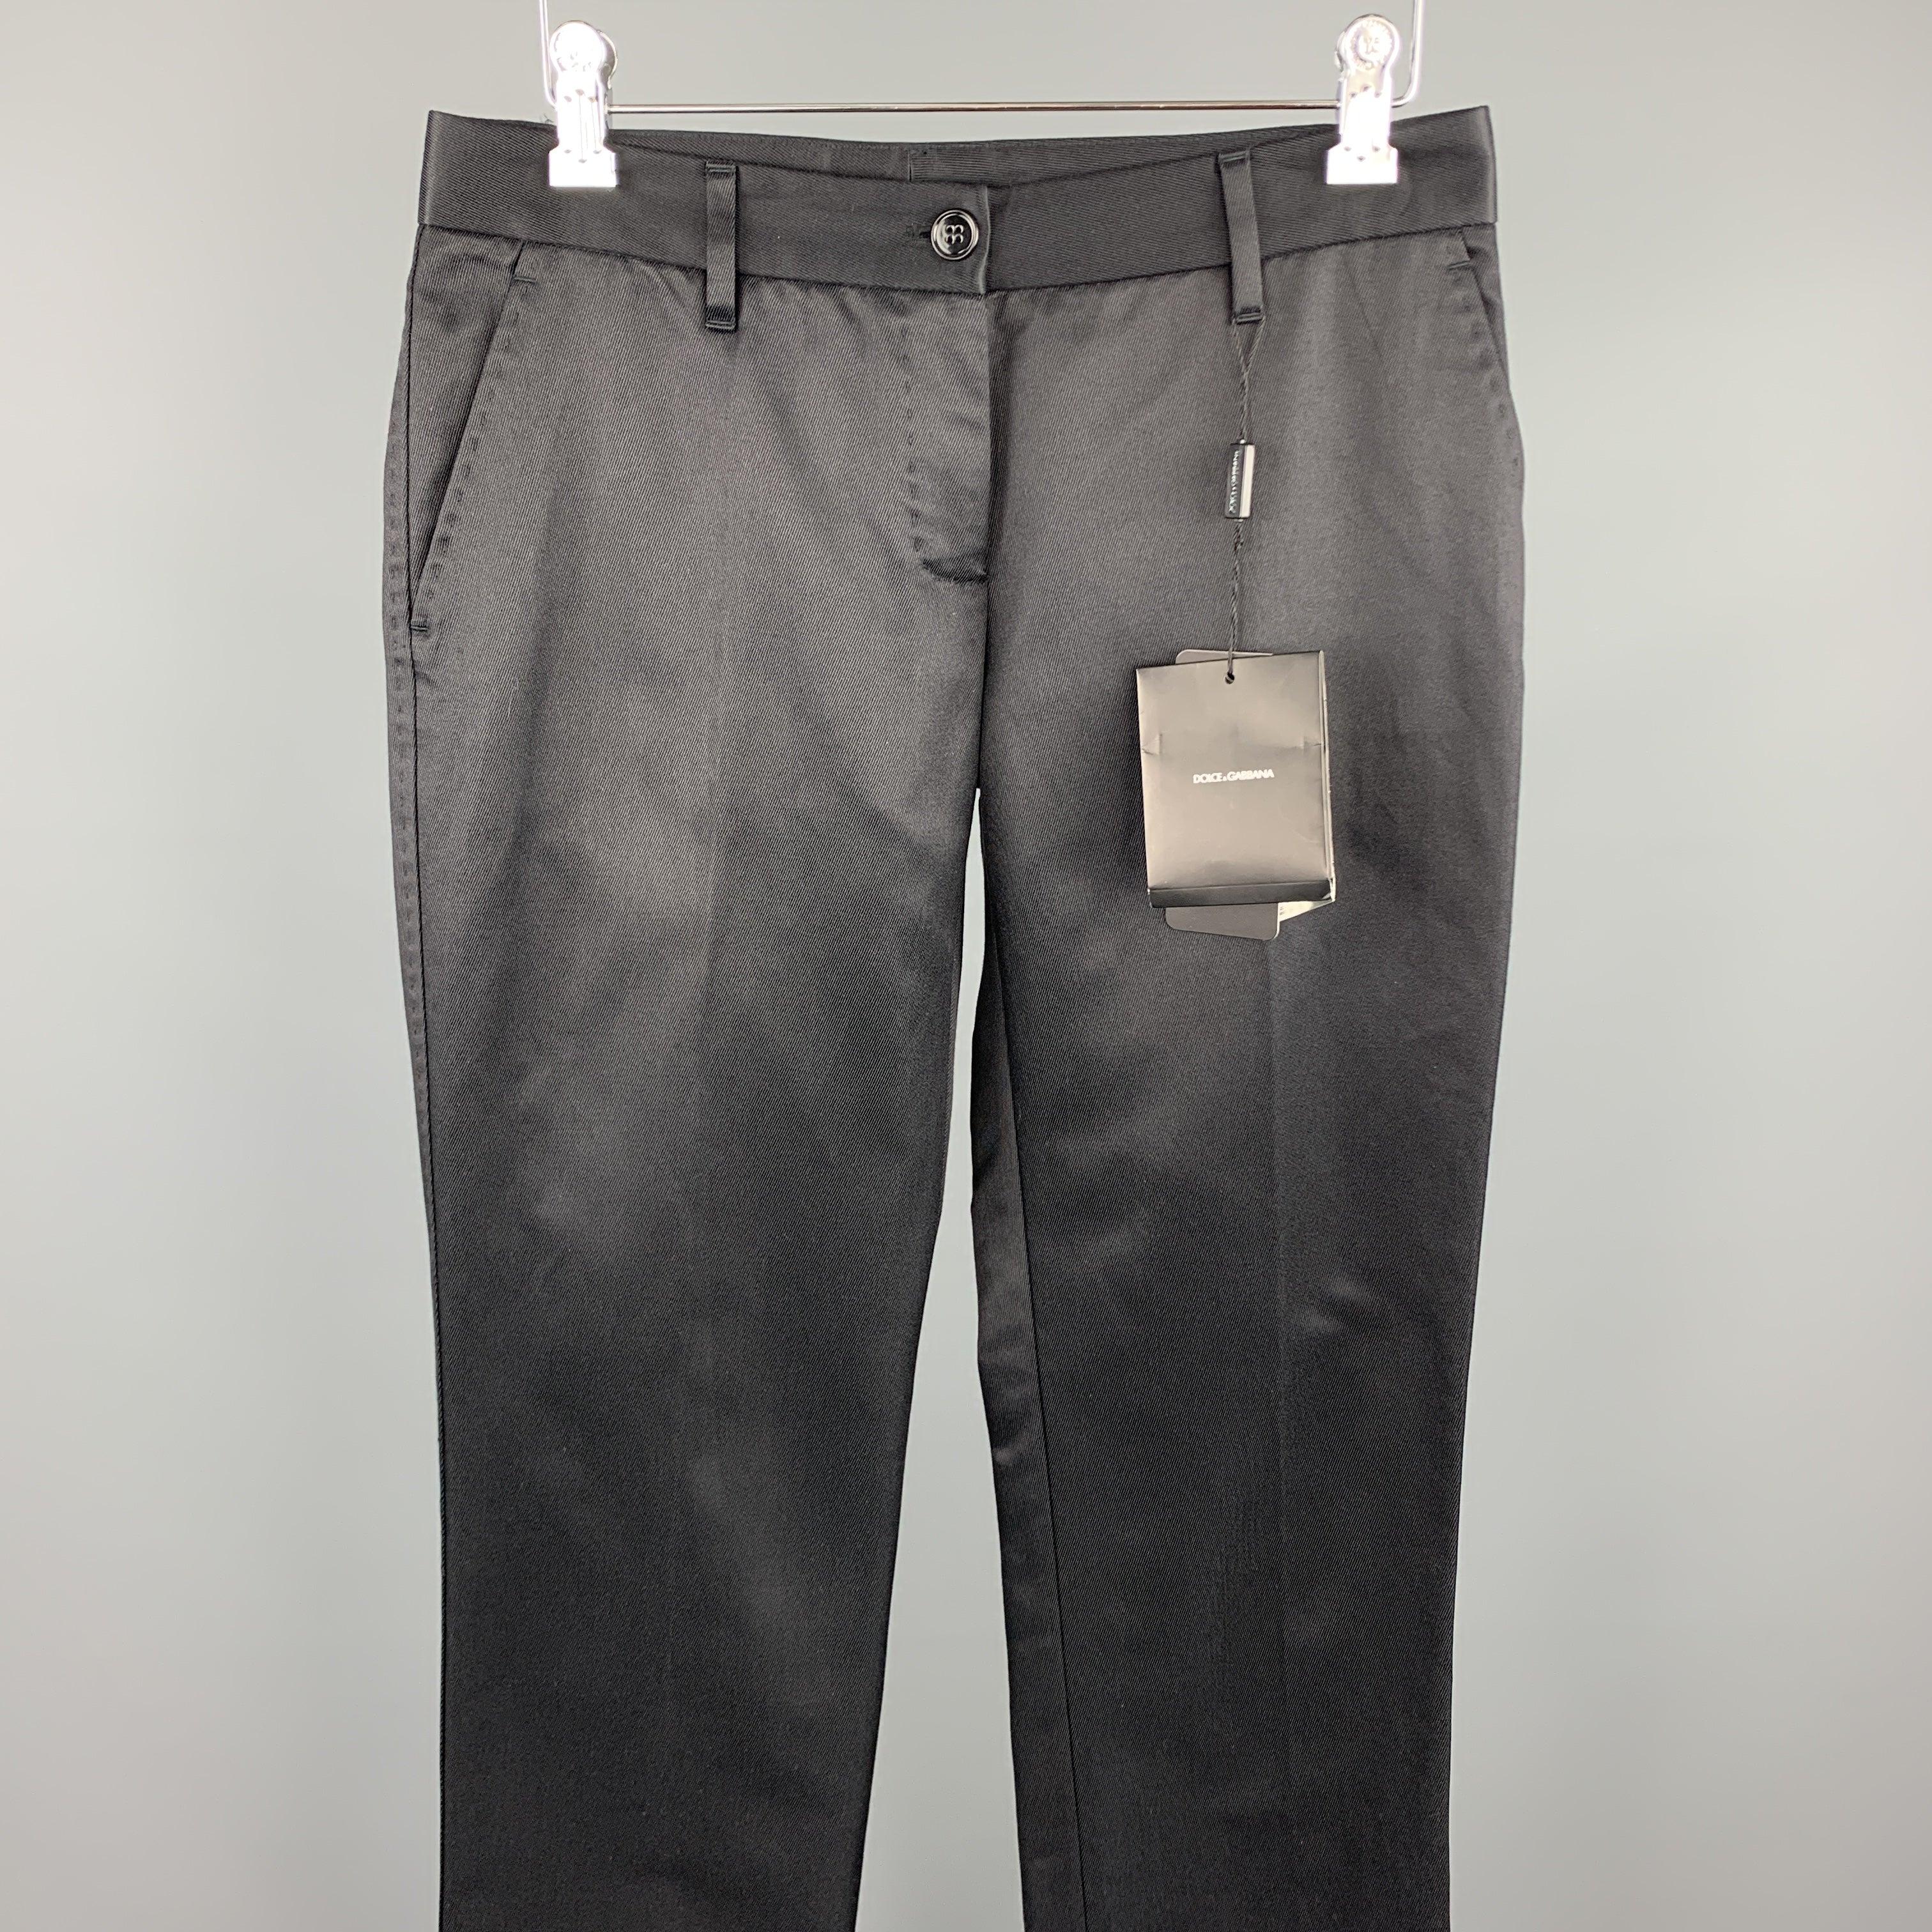 DOLCE & GABBANA dress pants black cotton / silk featuring a flat front and a zip fly closure. Made in Italy.New With Tags. 

Marked:   IT 38 

Measurements: 
  Waist: 29 inches 
Rise: 6.5 inches 
Inseam: 35 inches 
  
  
 
Reference: